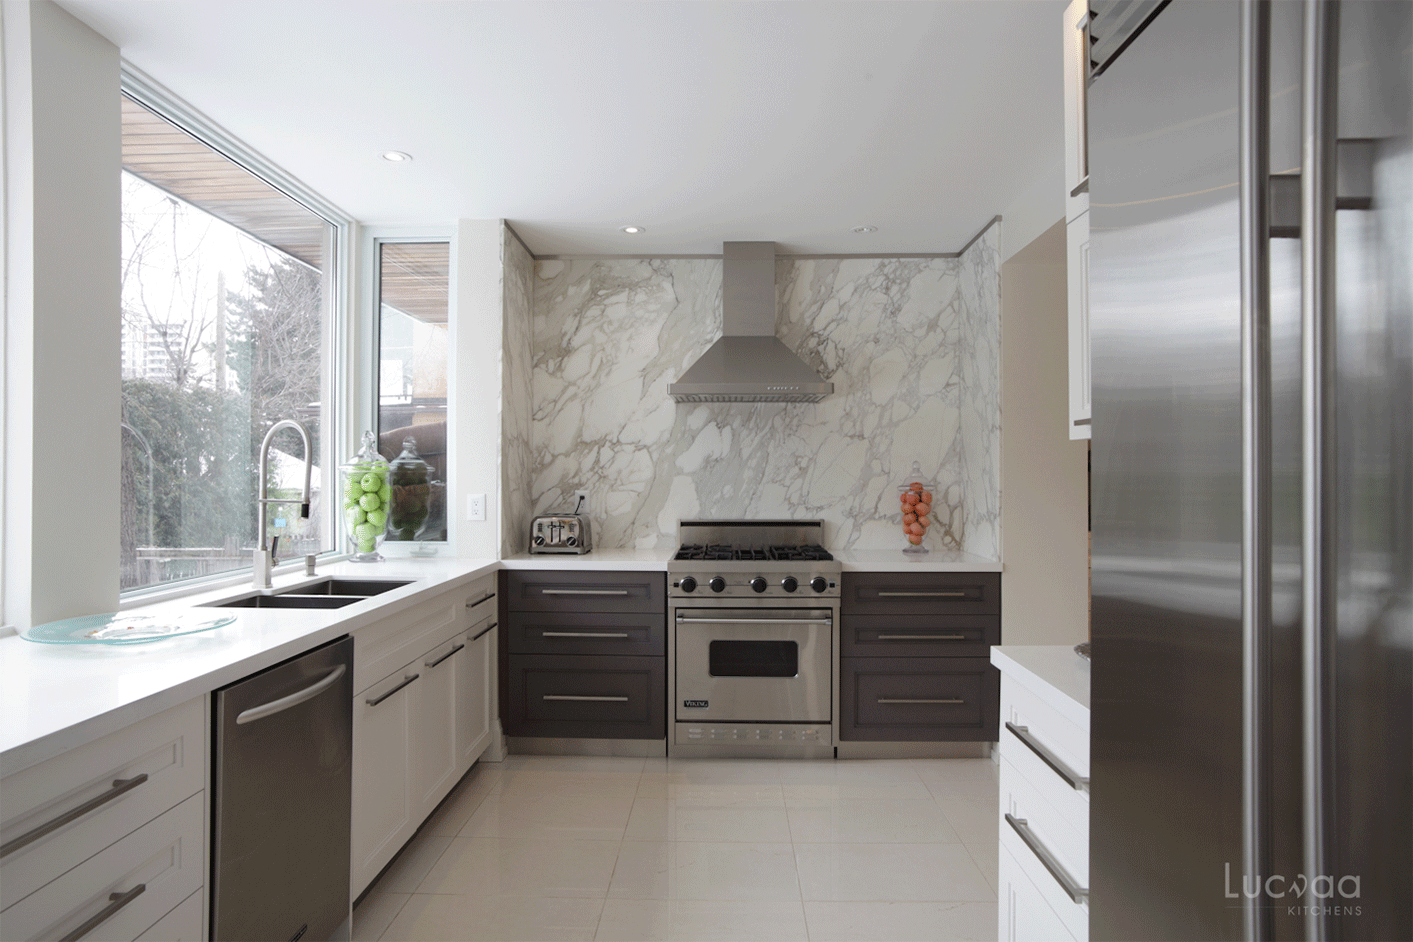 FOREST HILL | Lucvaa Kitchens